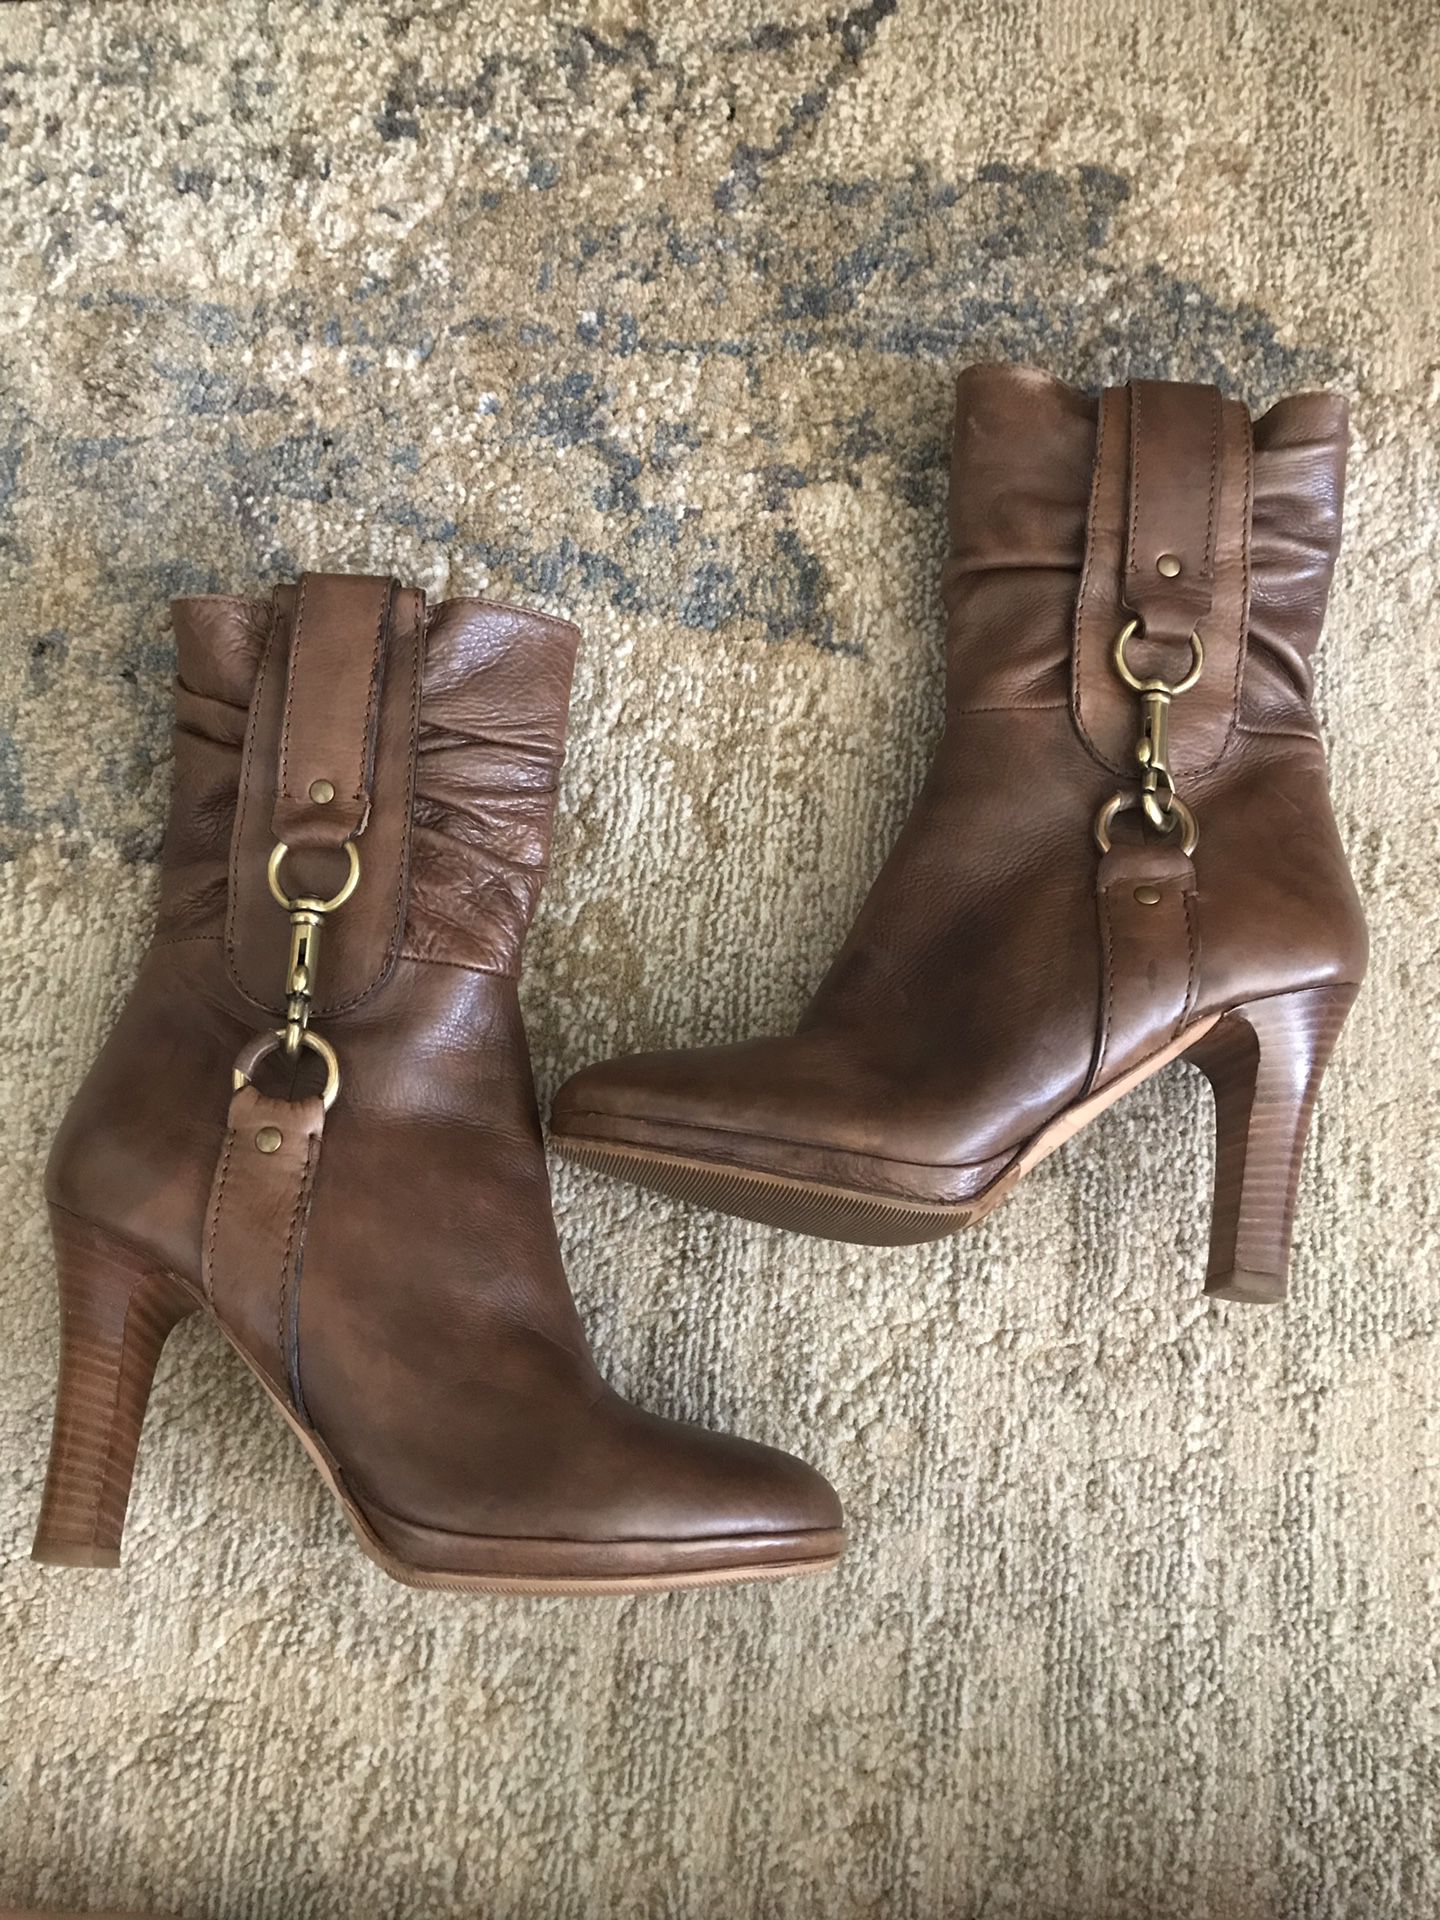 Coach ankle booties size 7